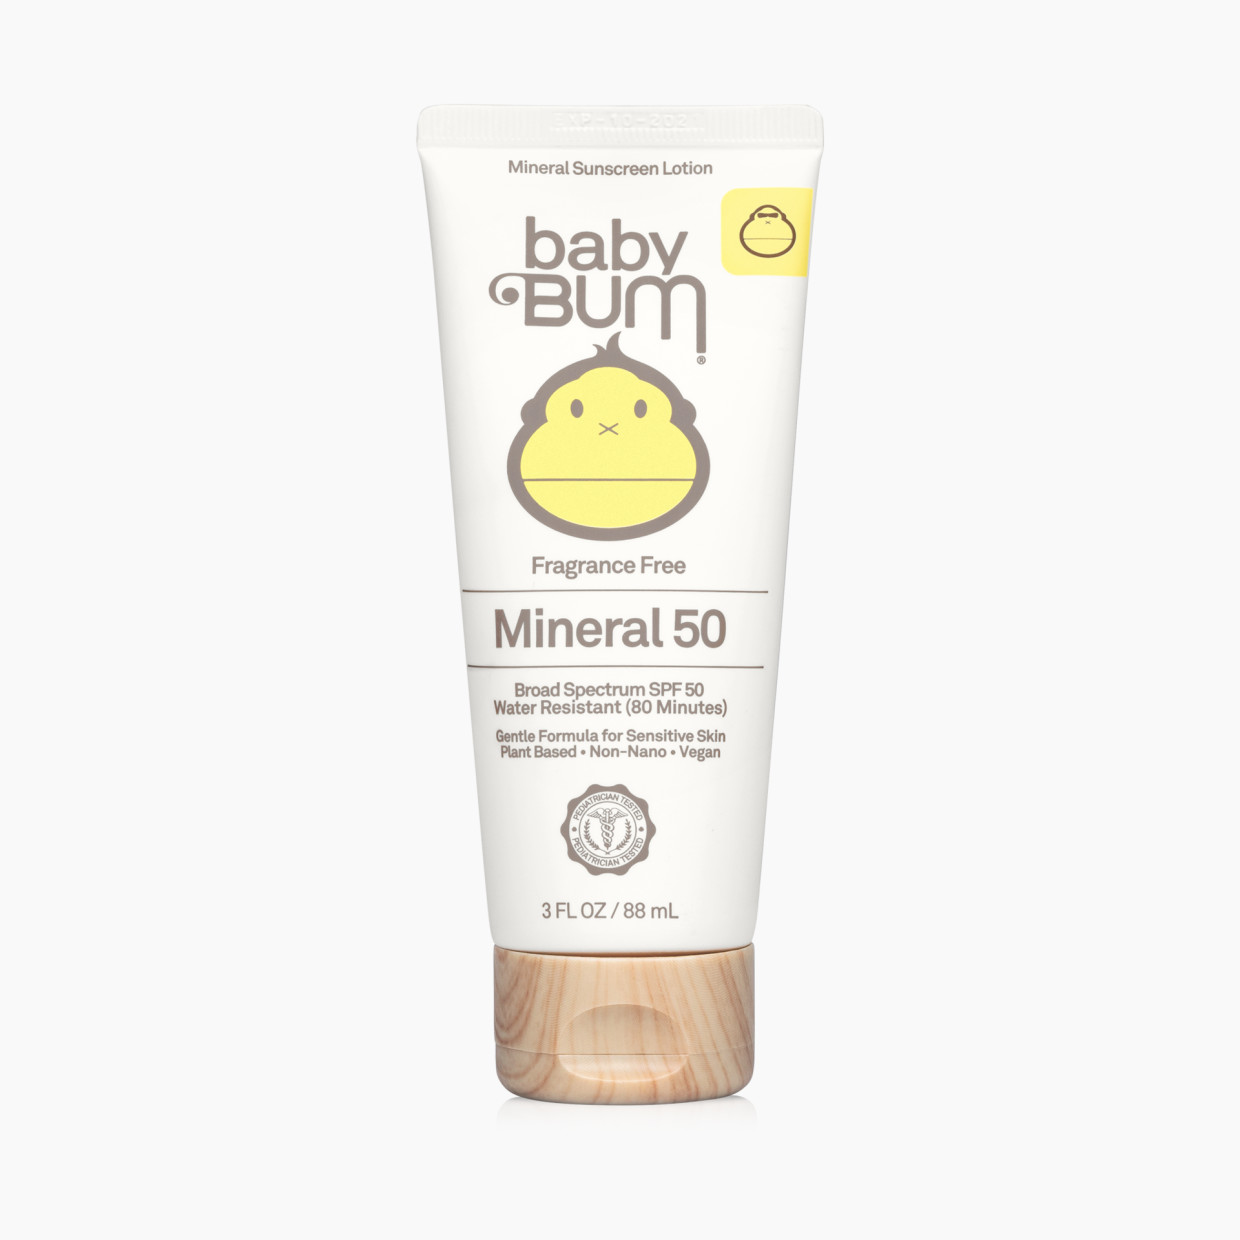 Baby Bum SPF 50 Mineral Sunscreen Lotion - Fragrance Free, 3 Fl Oz.